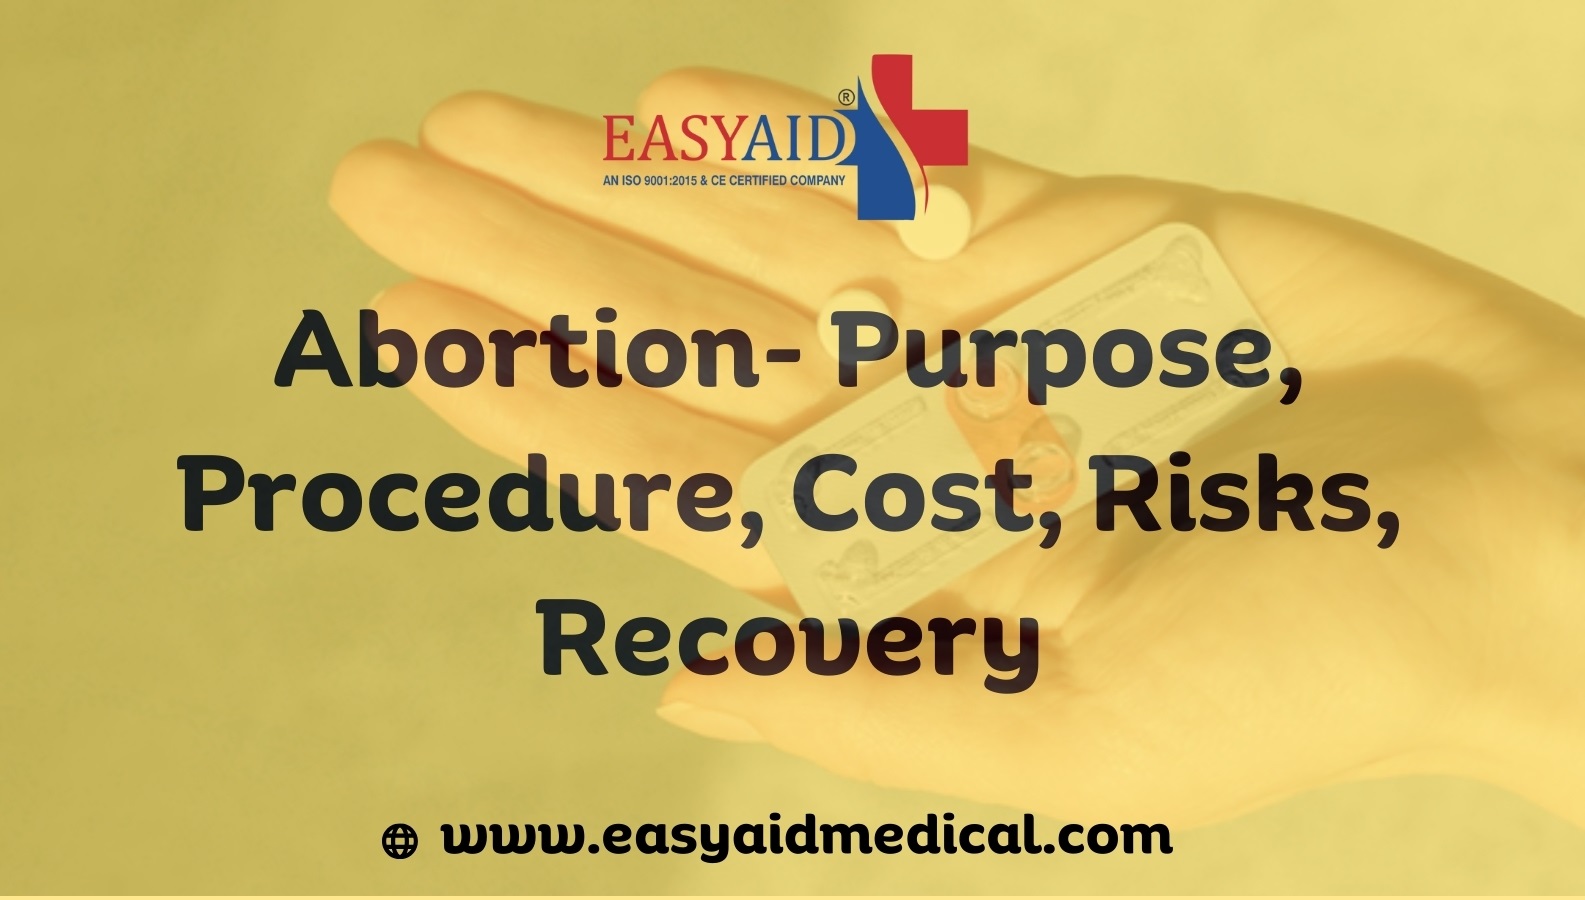 Abortion- Purpose, Procedure, Cost, Risks, Recovery